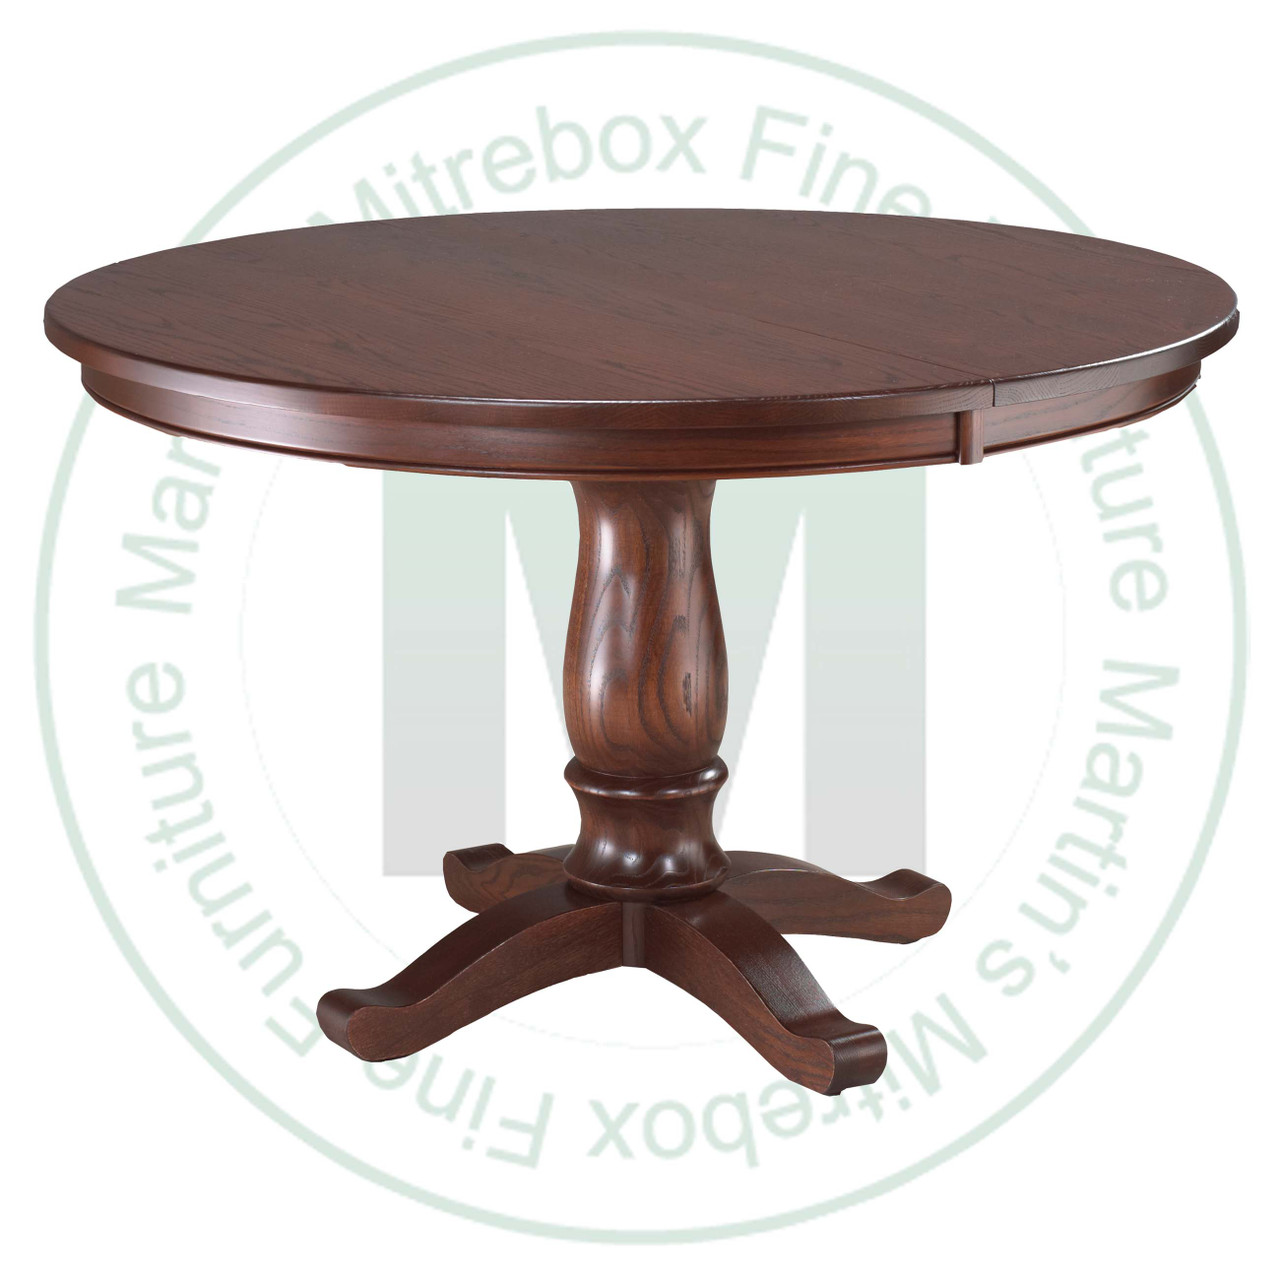 Wormy Maple Kimberly Crest Single Pedestal Table 36''D x 42''W x 30''H With 2 - 12'' Leaves Table